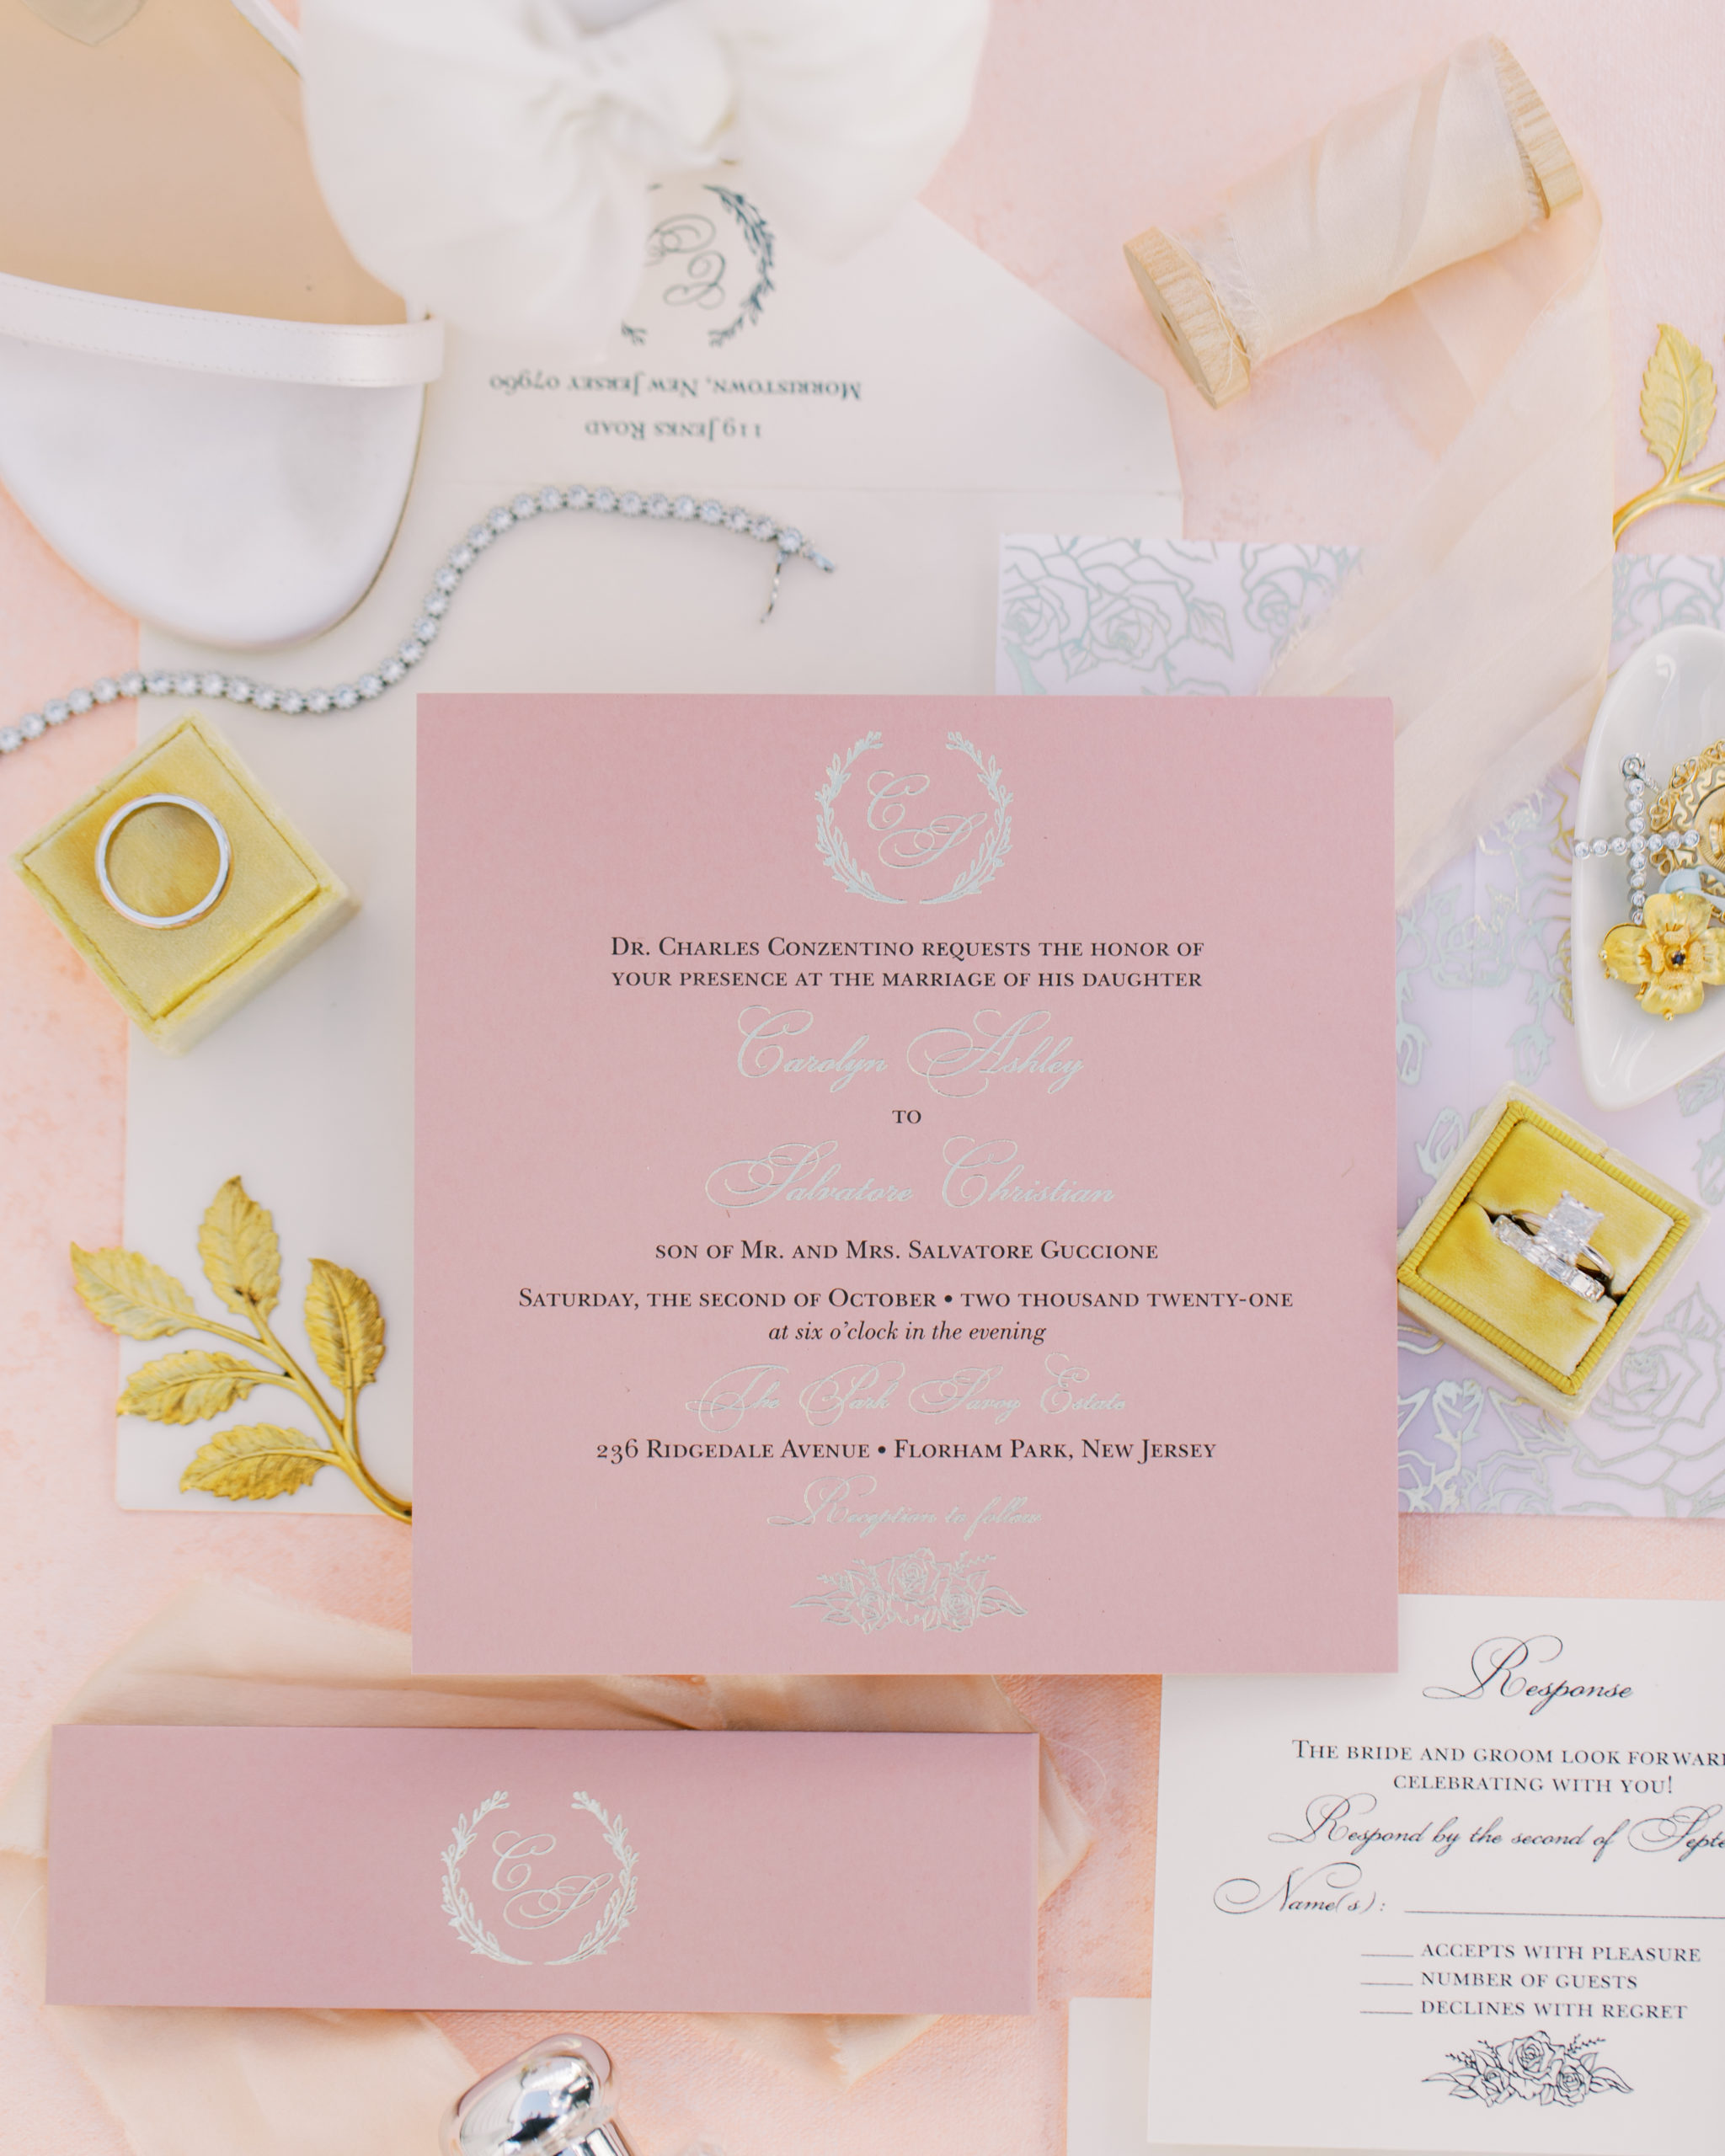 Invitation suite with pink invitation cards and personal details